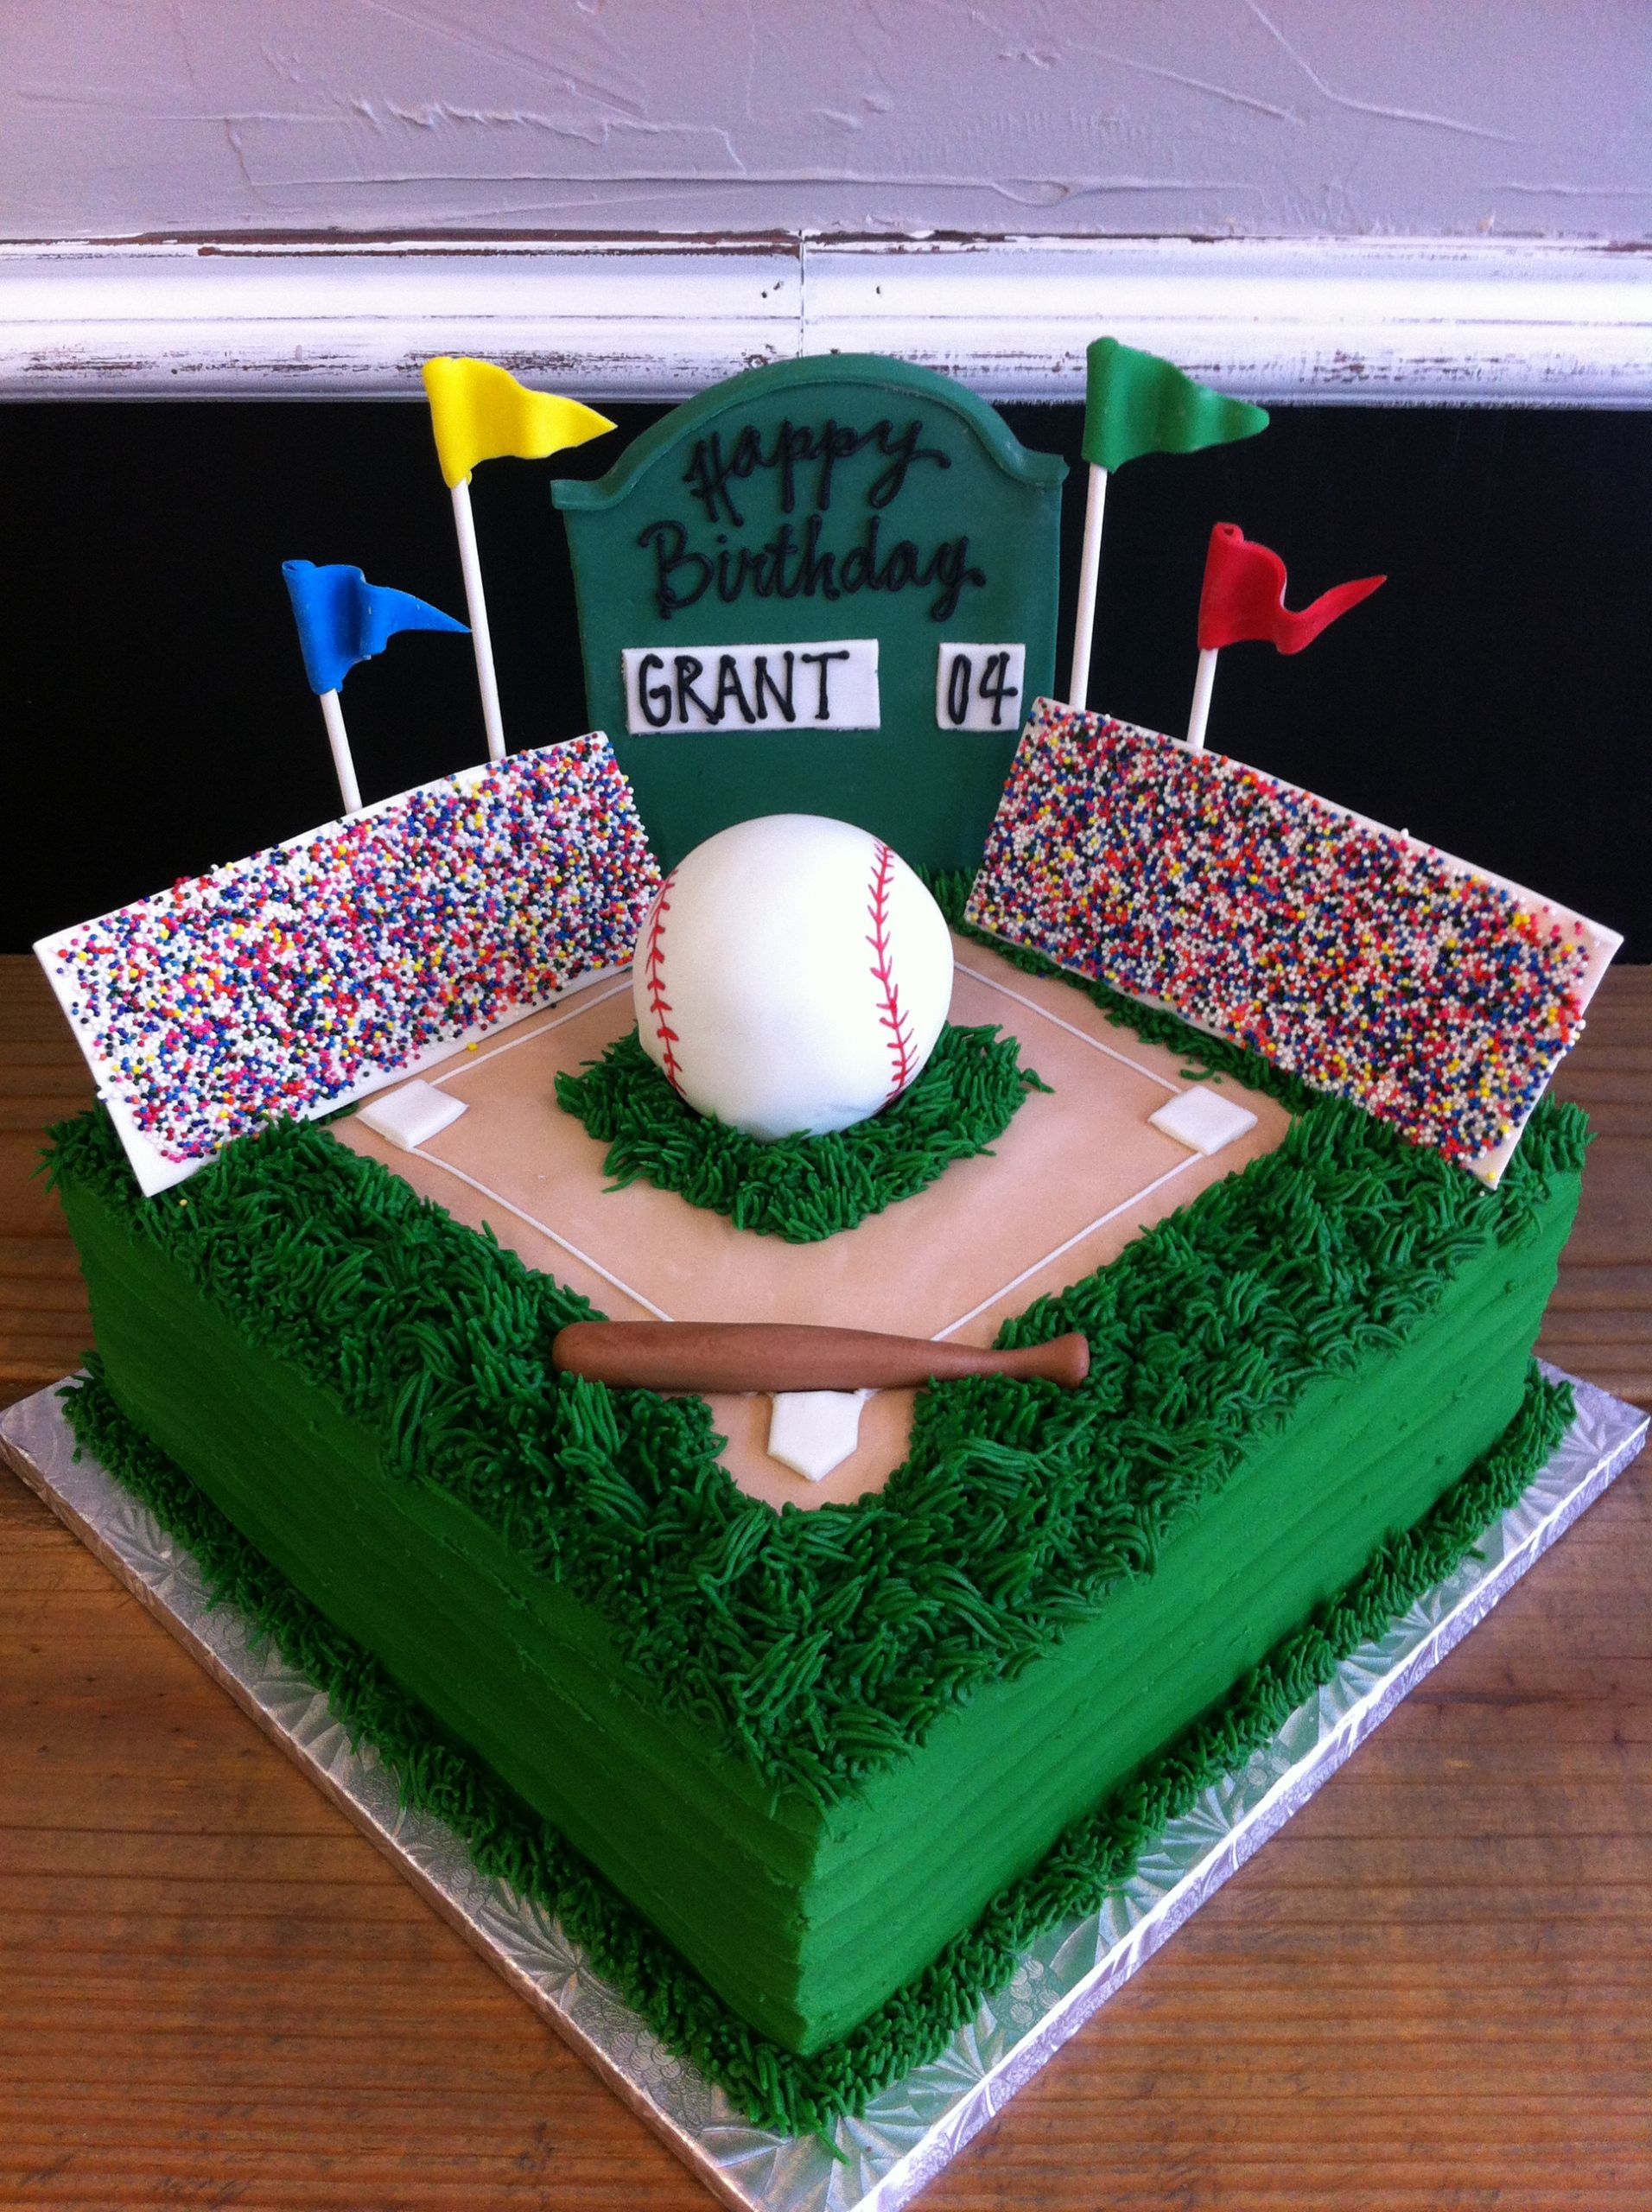 Baseball Birthday Cakes
 Party cakes in McKinney and Dallas Texas